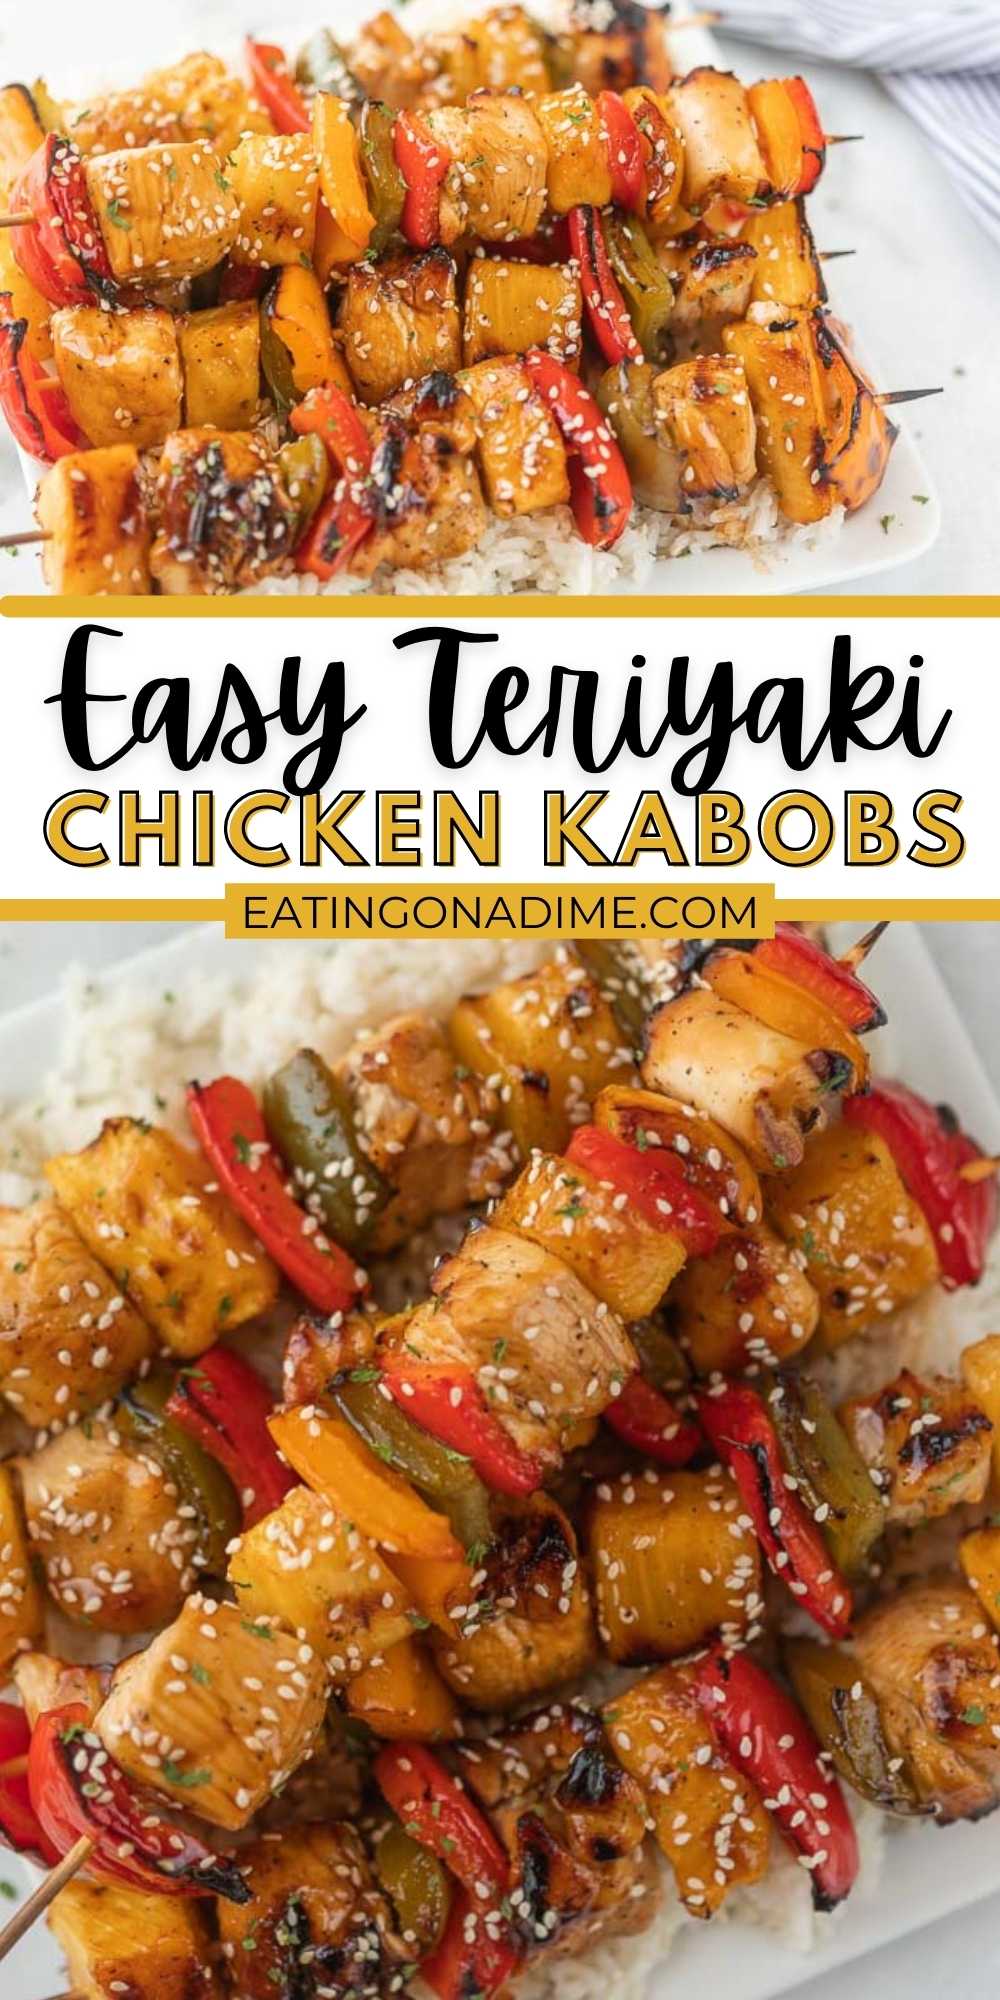 These easy to make Teriyaki Chicken Kabobs are simple to make on the grill or in the oven.  This easy teriyaki marinade is delicious on chicken and with pineapple too.  You’ll love this easy chicken grilling recipe.  #eatingonadime #grillingrecipes #chickenrecipes #kabobrecipes 
